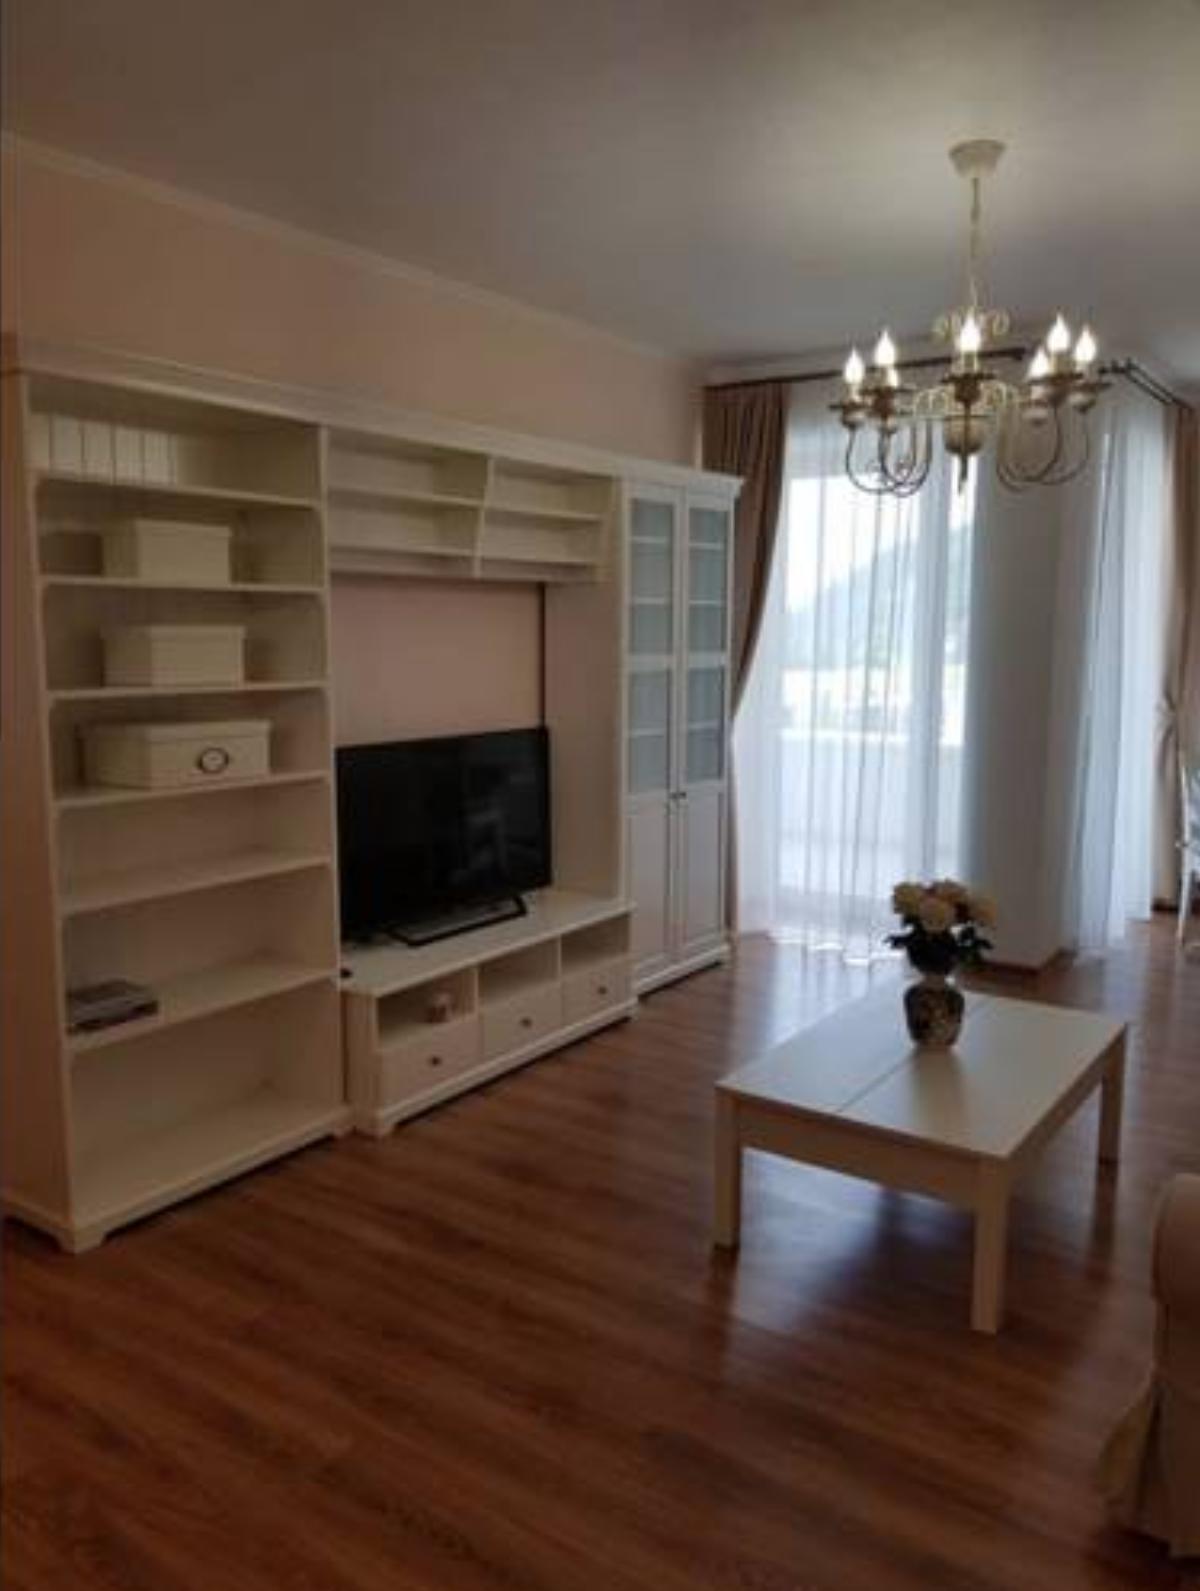 Luxurious apartment in the luxurious area of Banska Bystrica Hotel Banská Bystrica Slovakia